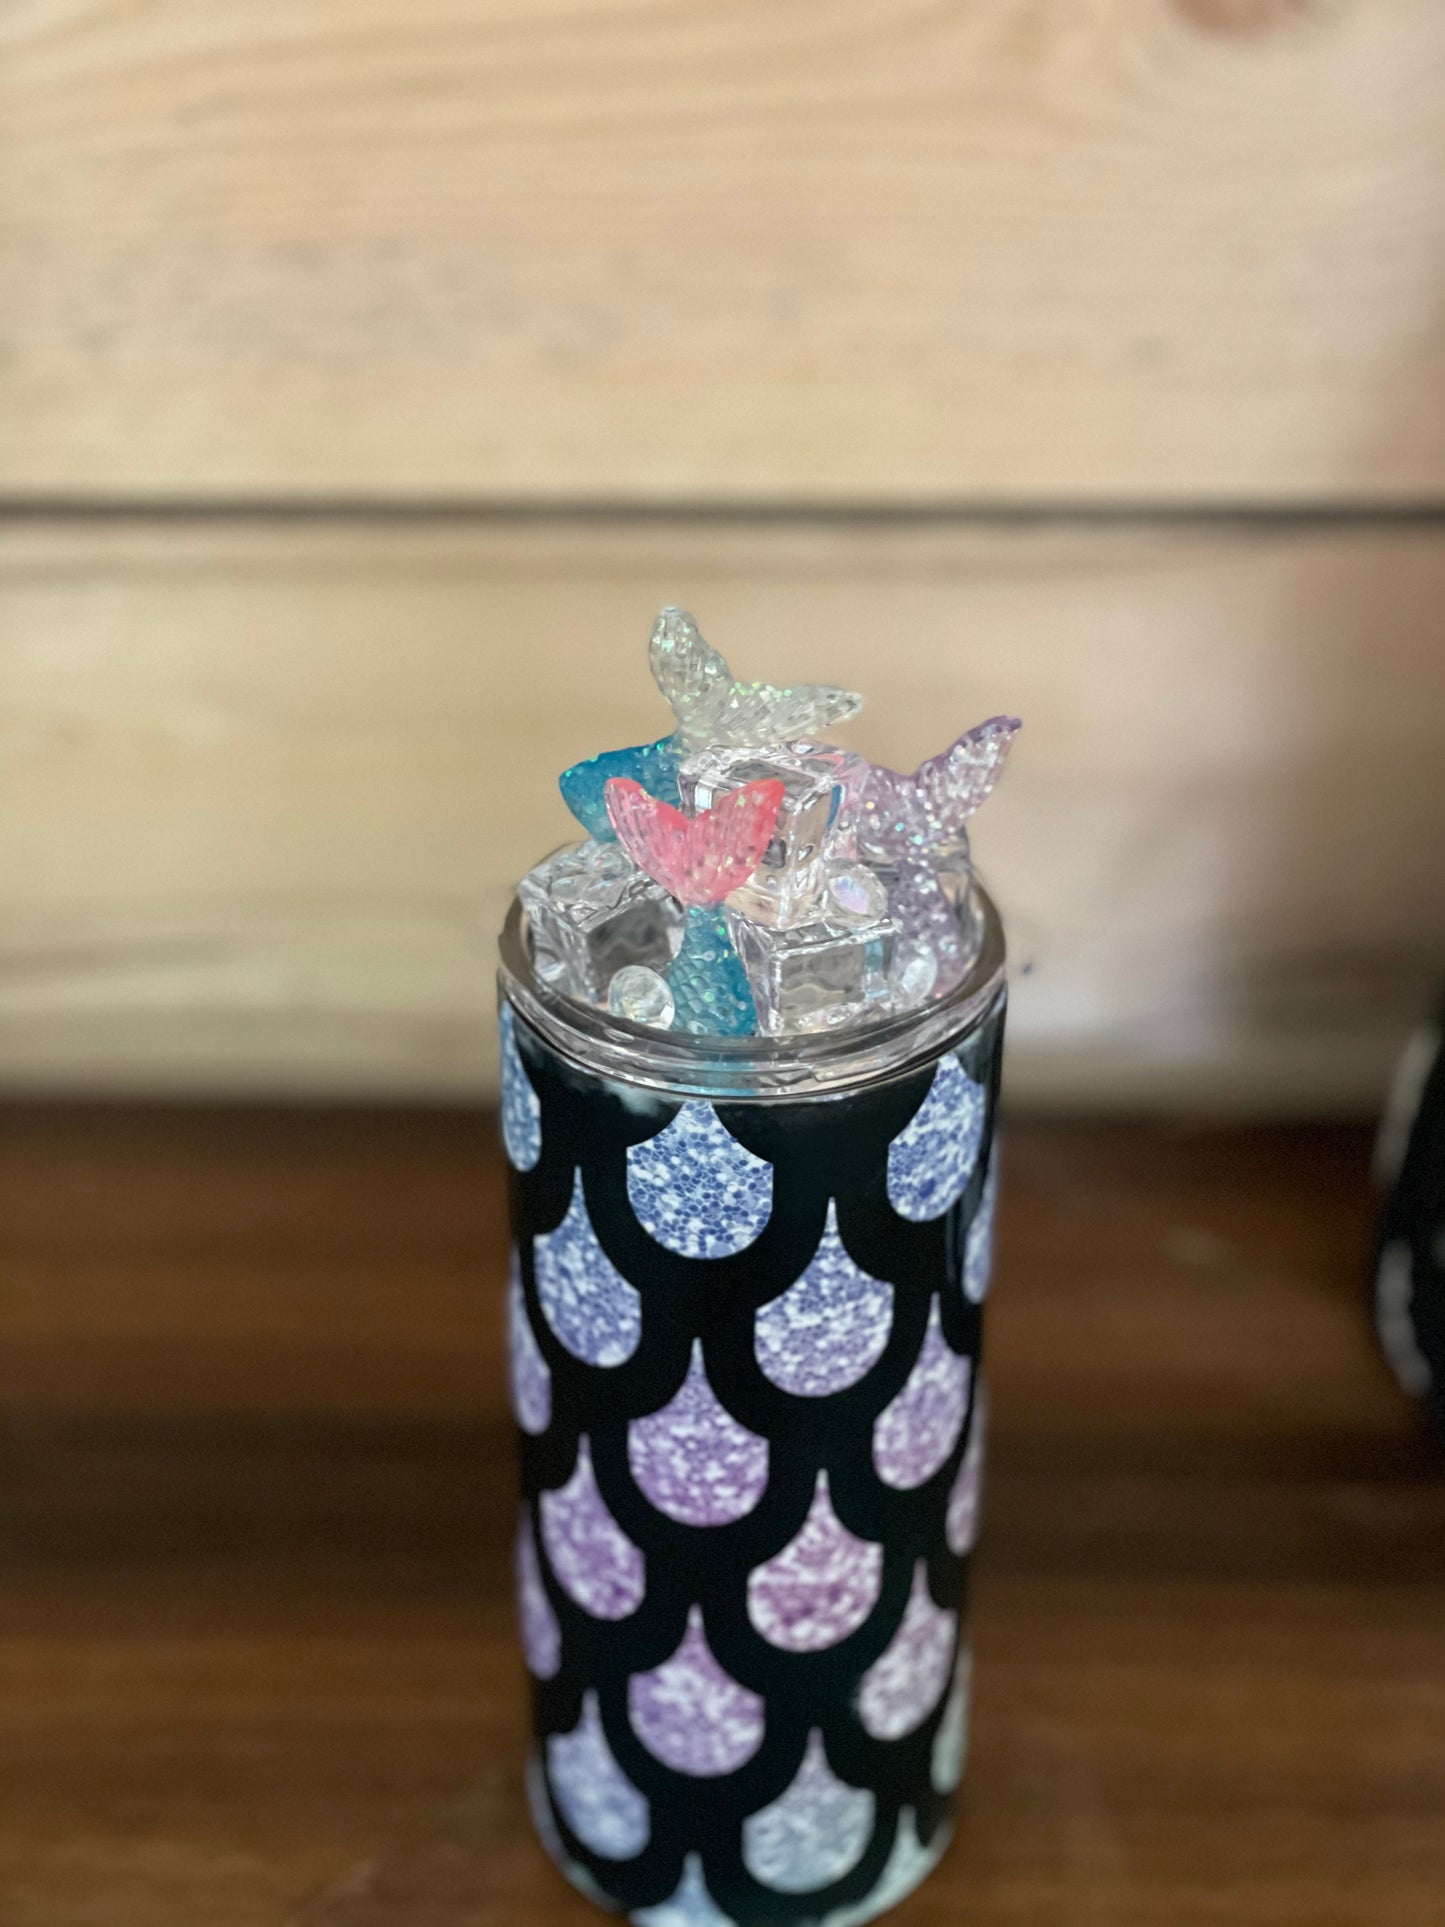 15 ounce Mermaid tumbler with two lids